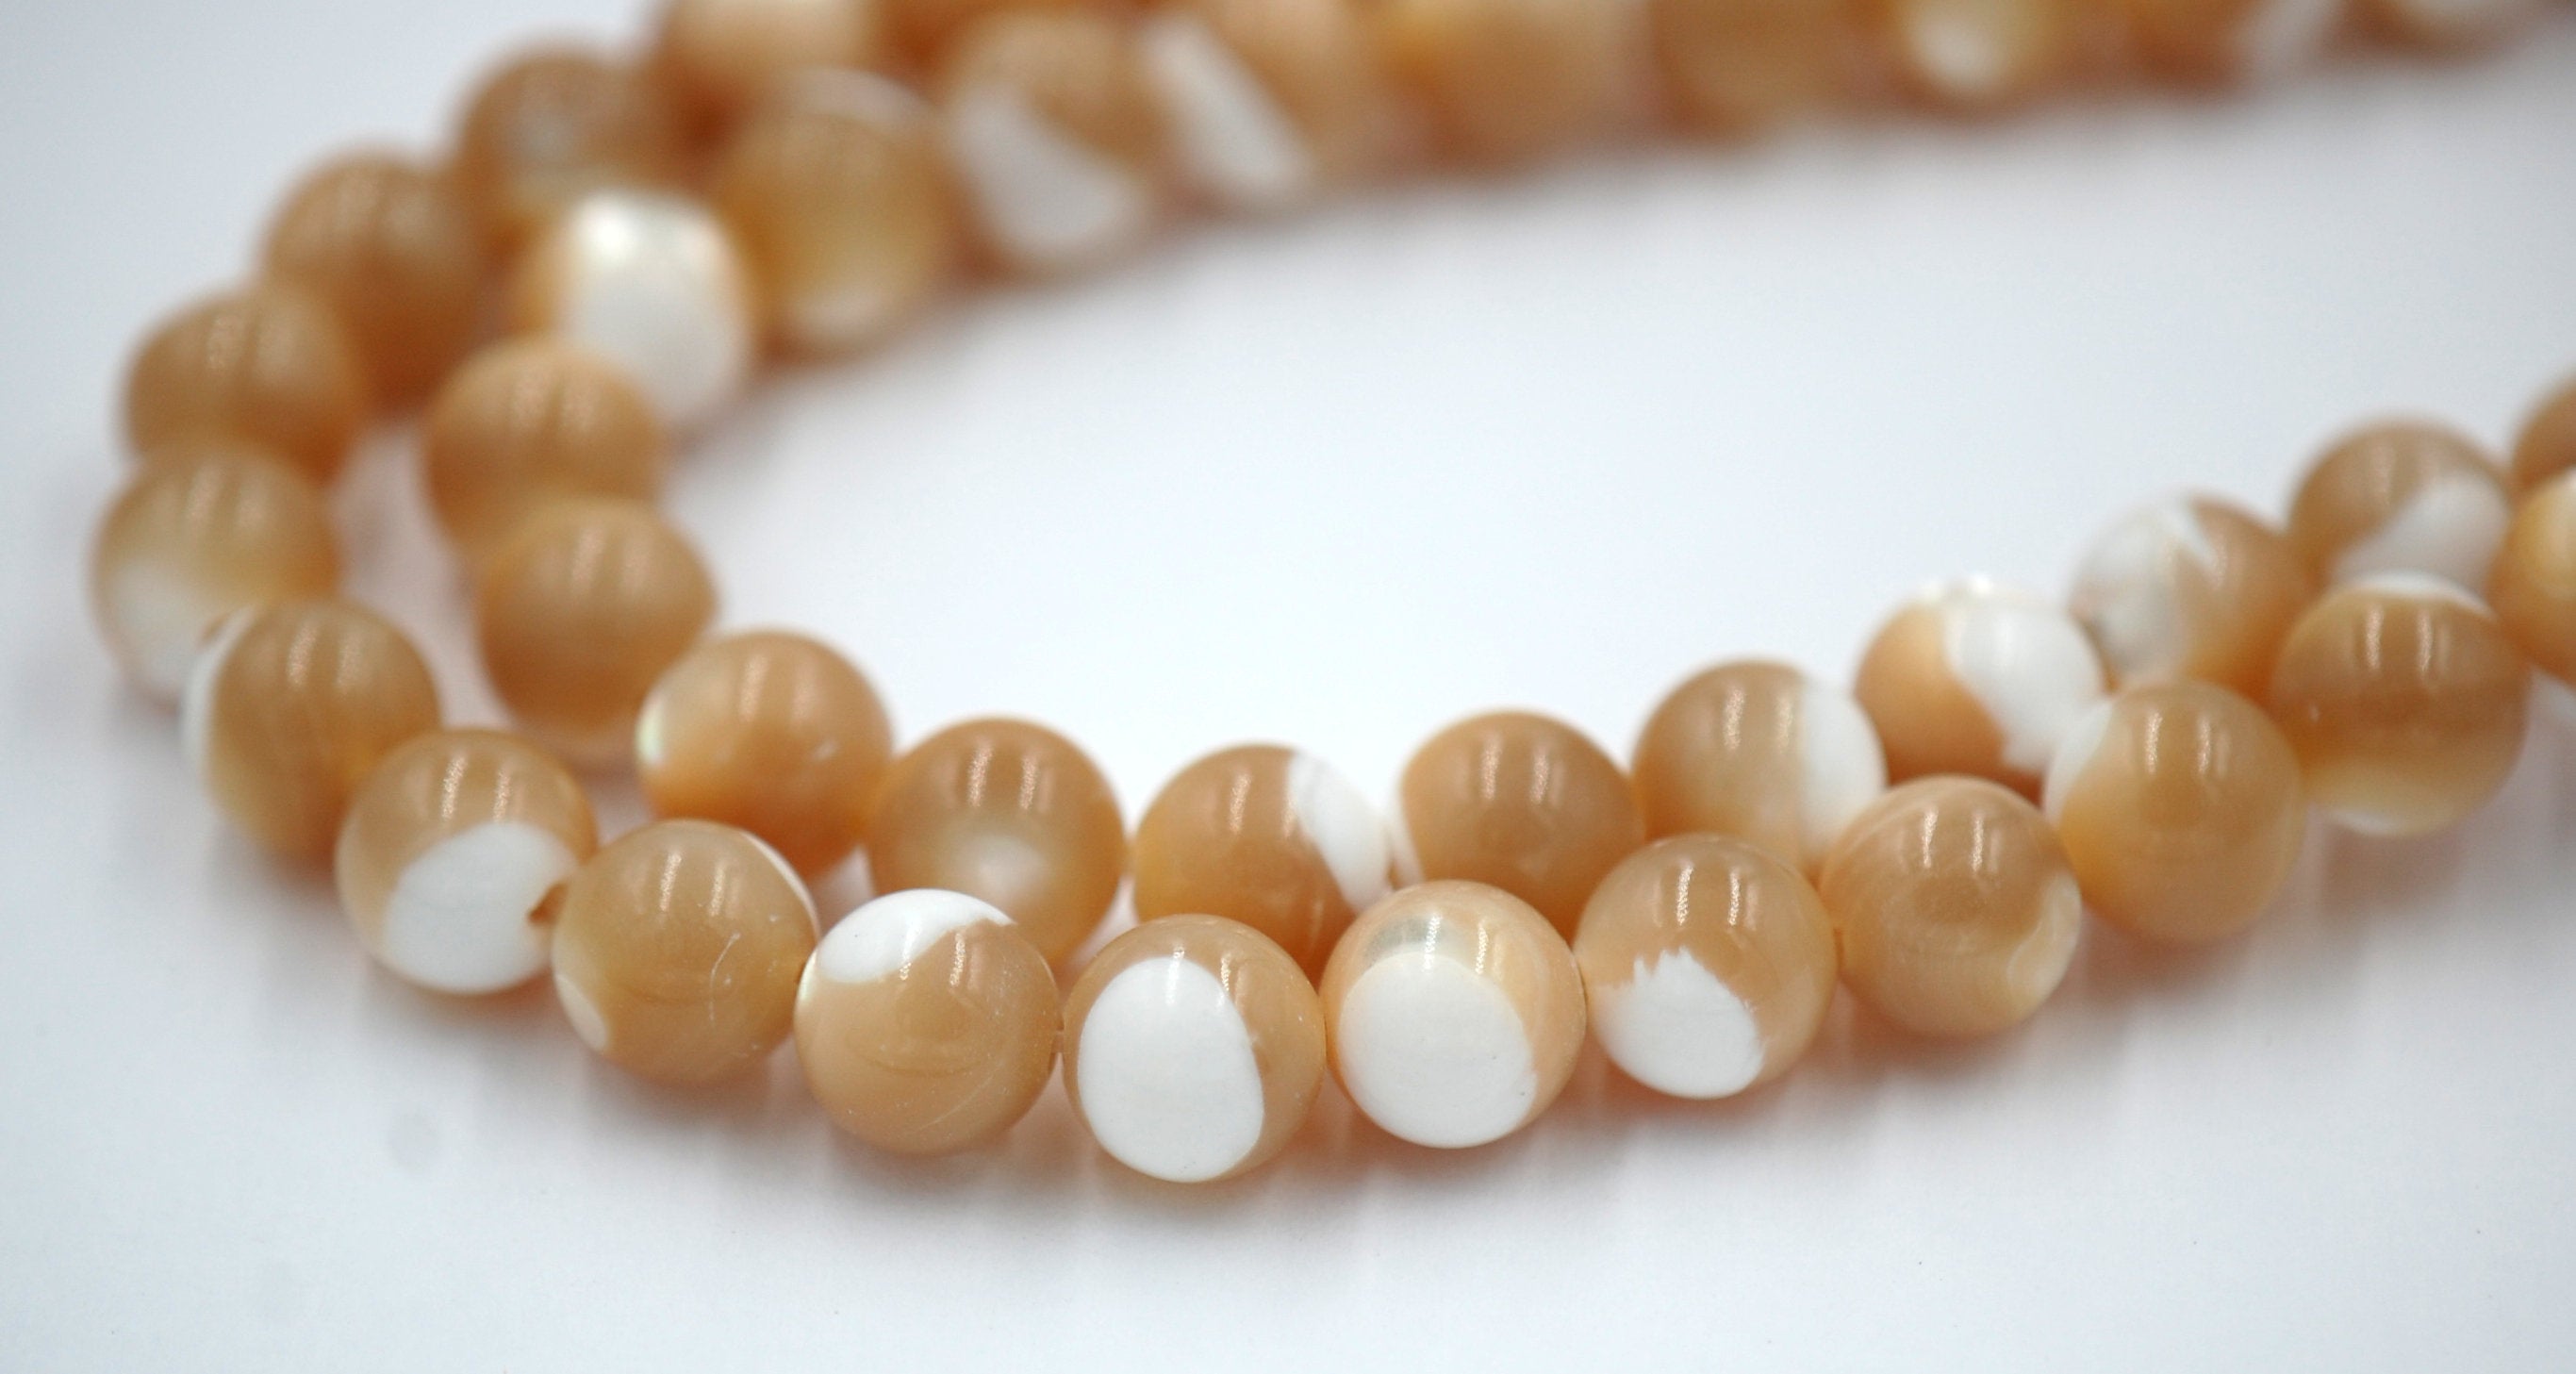 Mother of Pearl Beads Strands, 4mm, 6mm, 8mm, 10mm -Full Strand